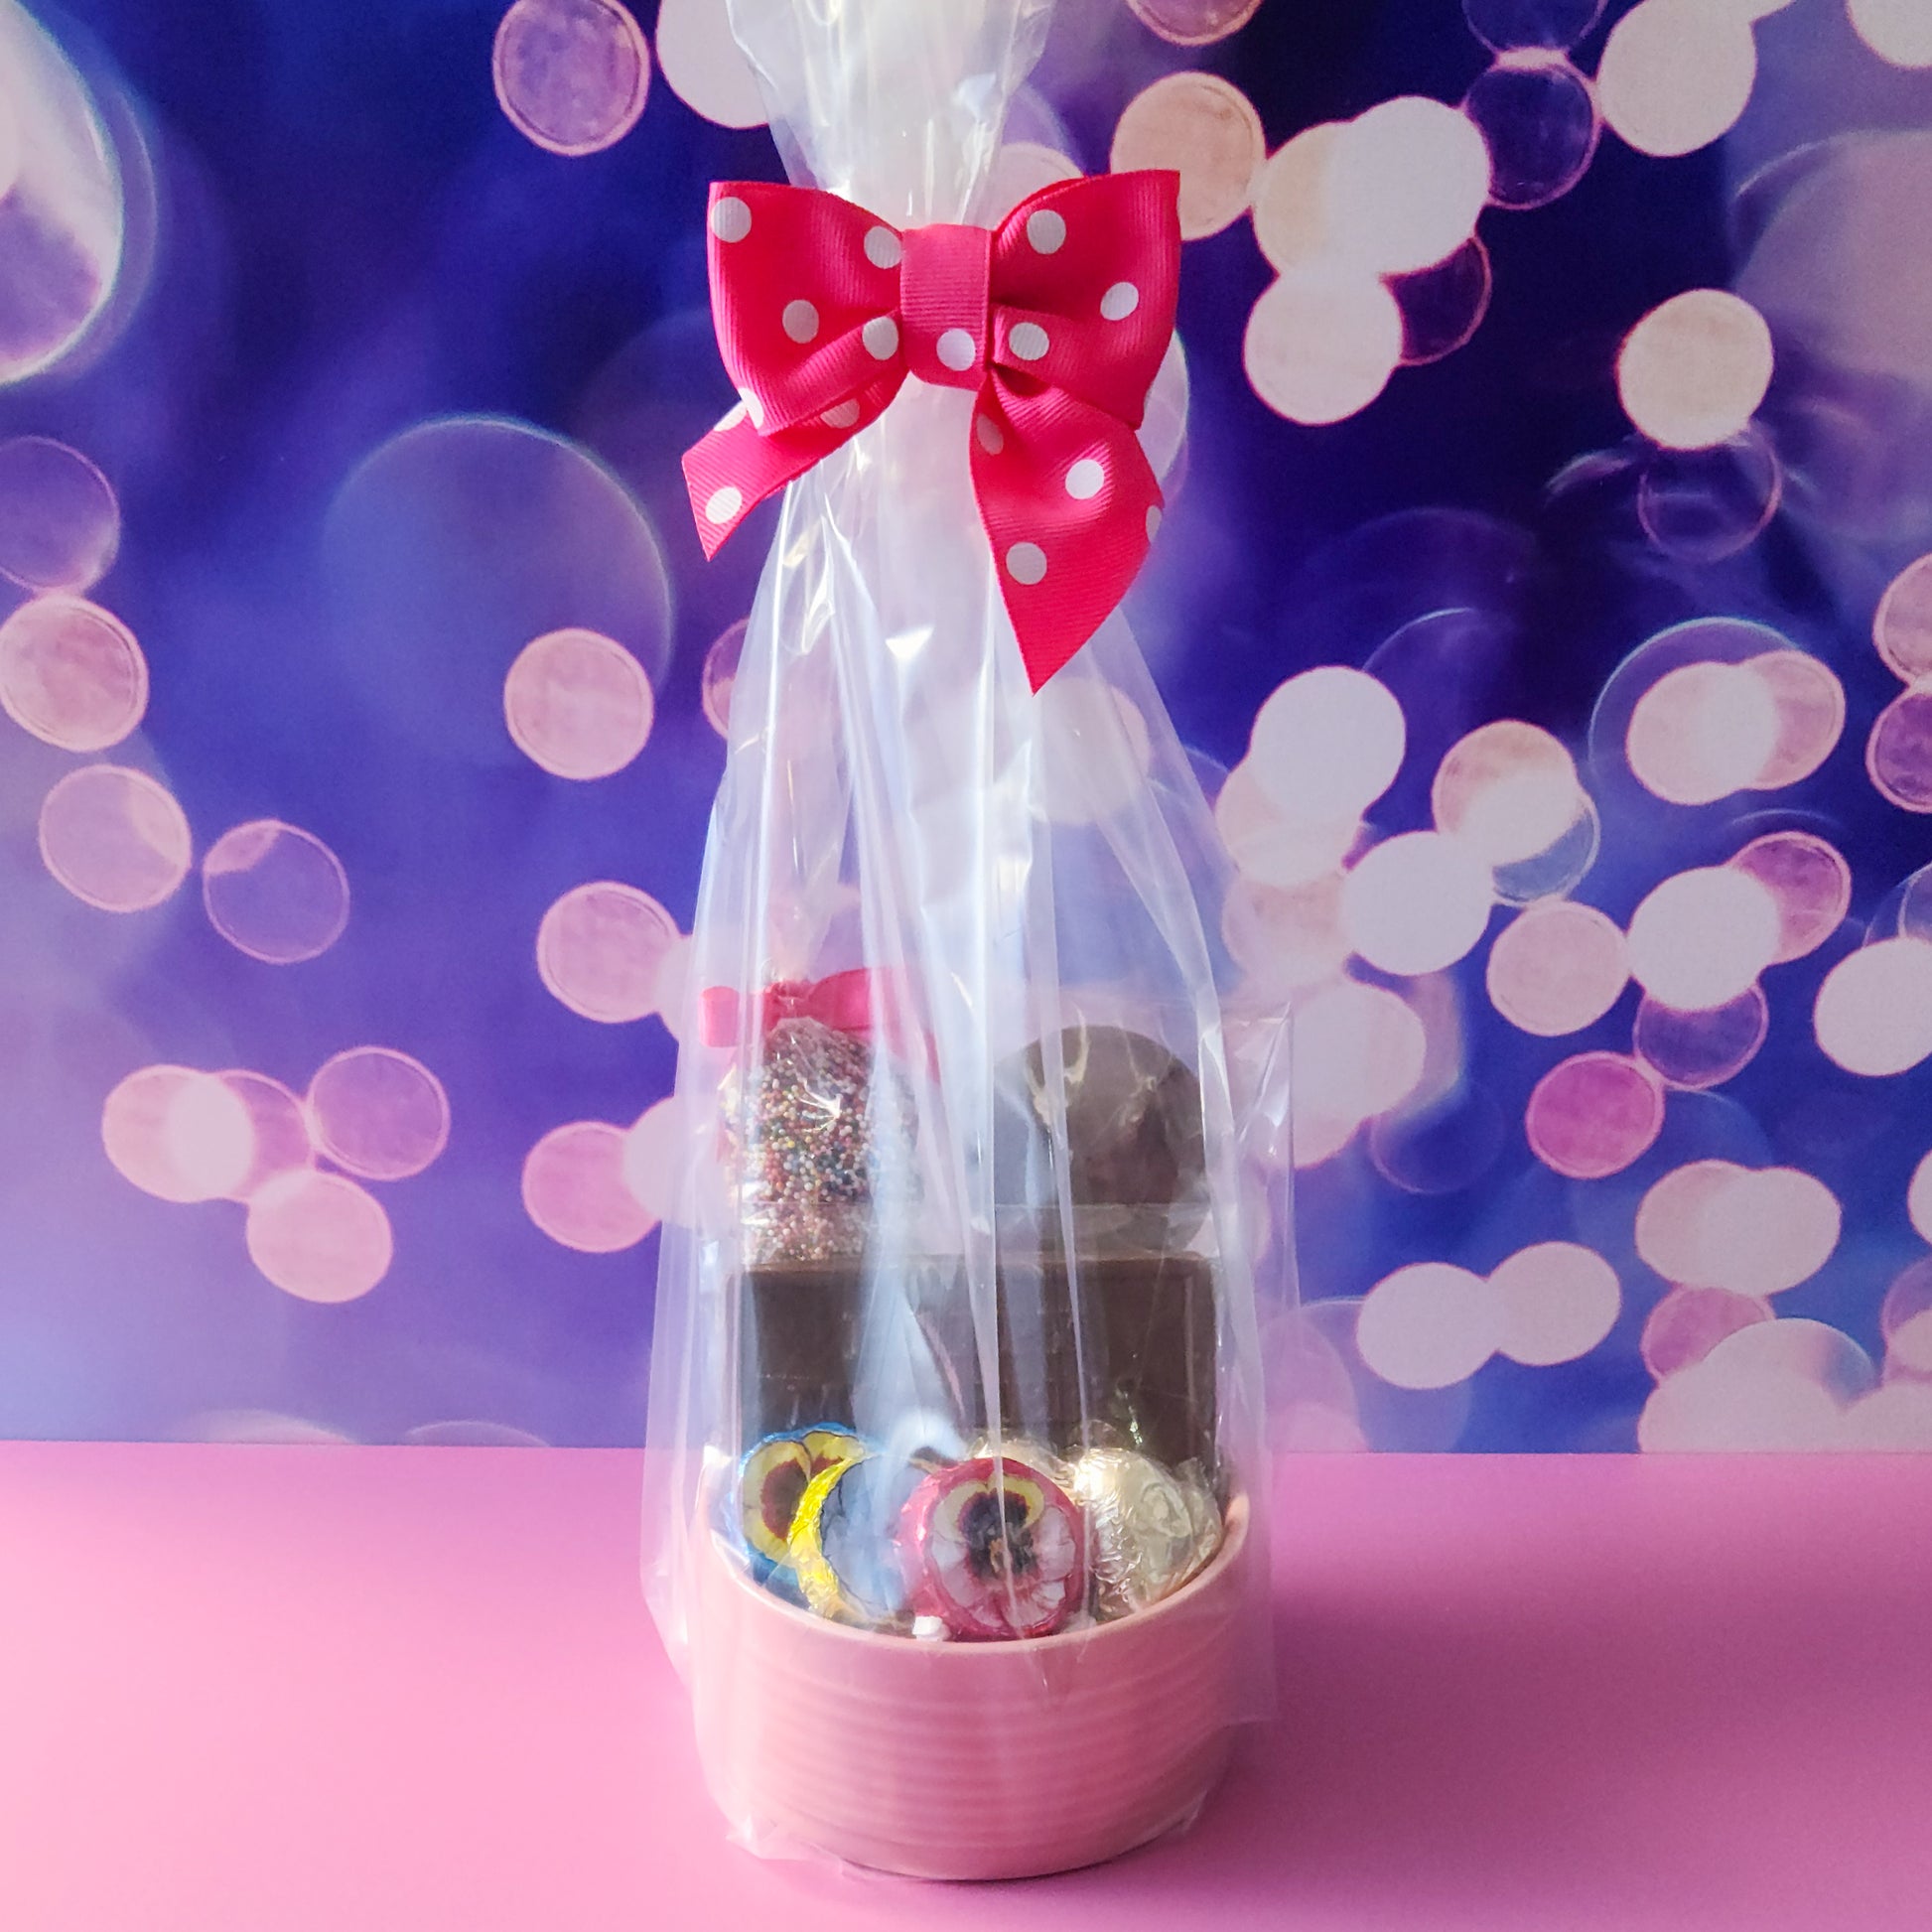 Tell mom how much she means to you this Mother's Day with a pastel pink candy dish filled with all of mom's favorite candies.